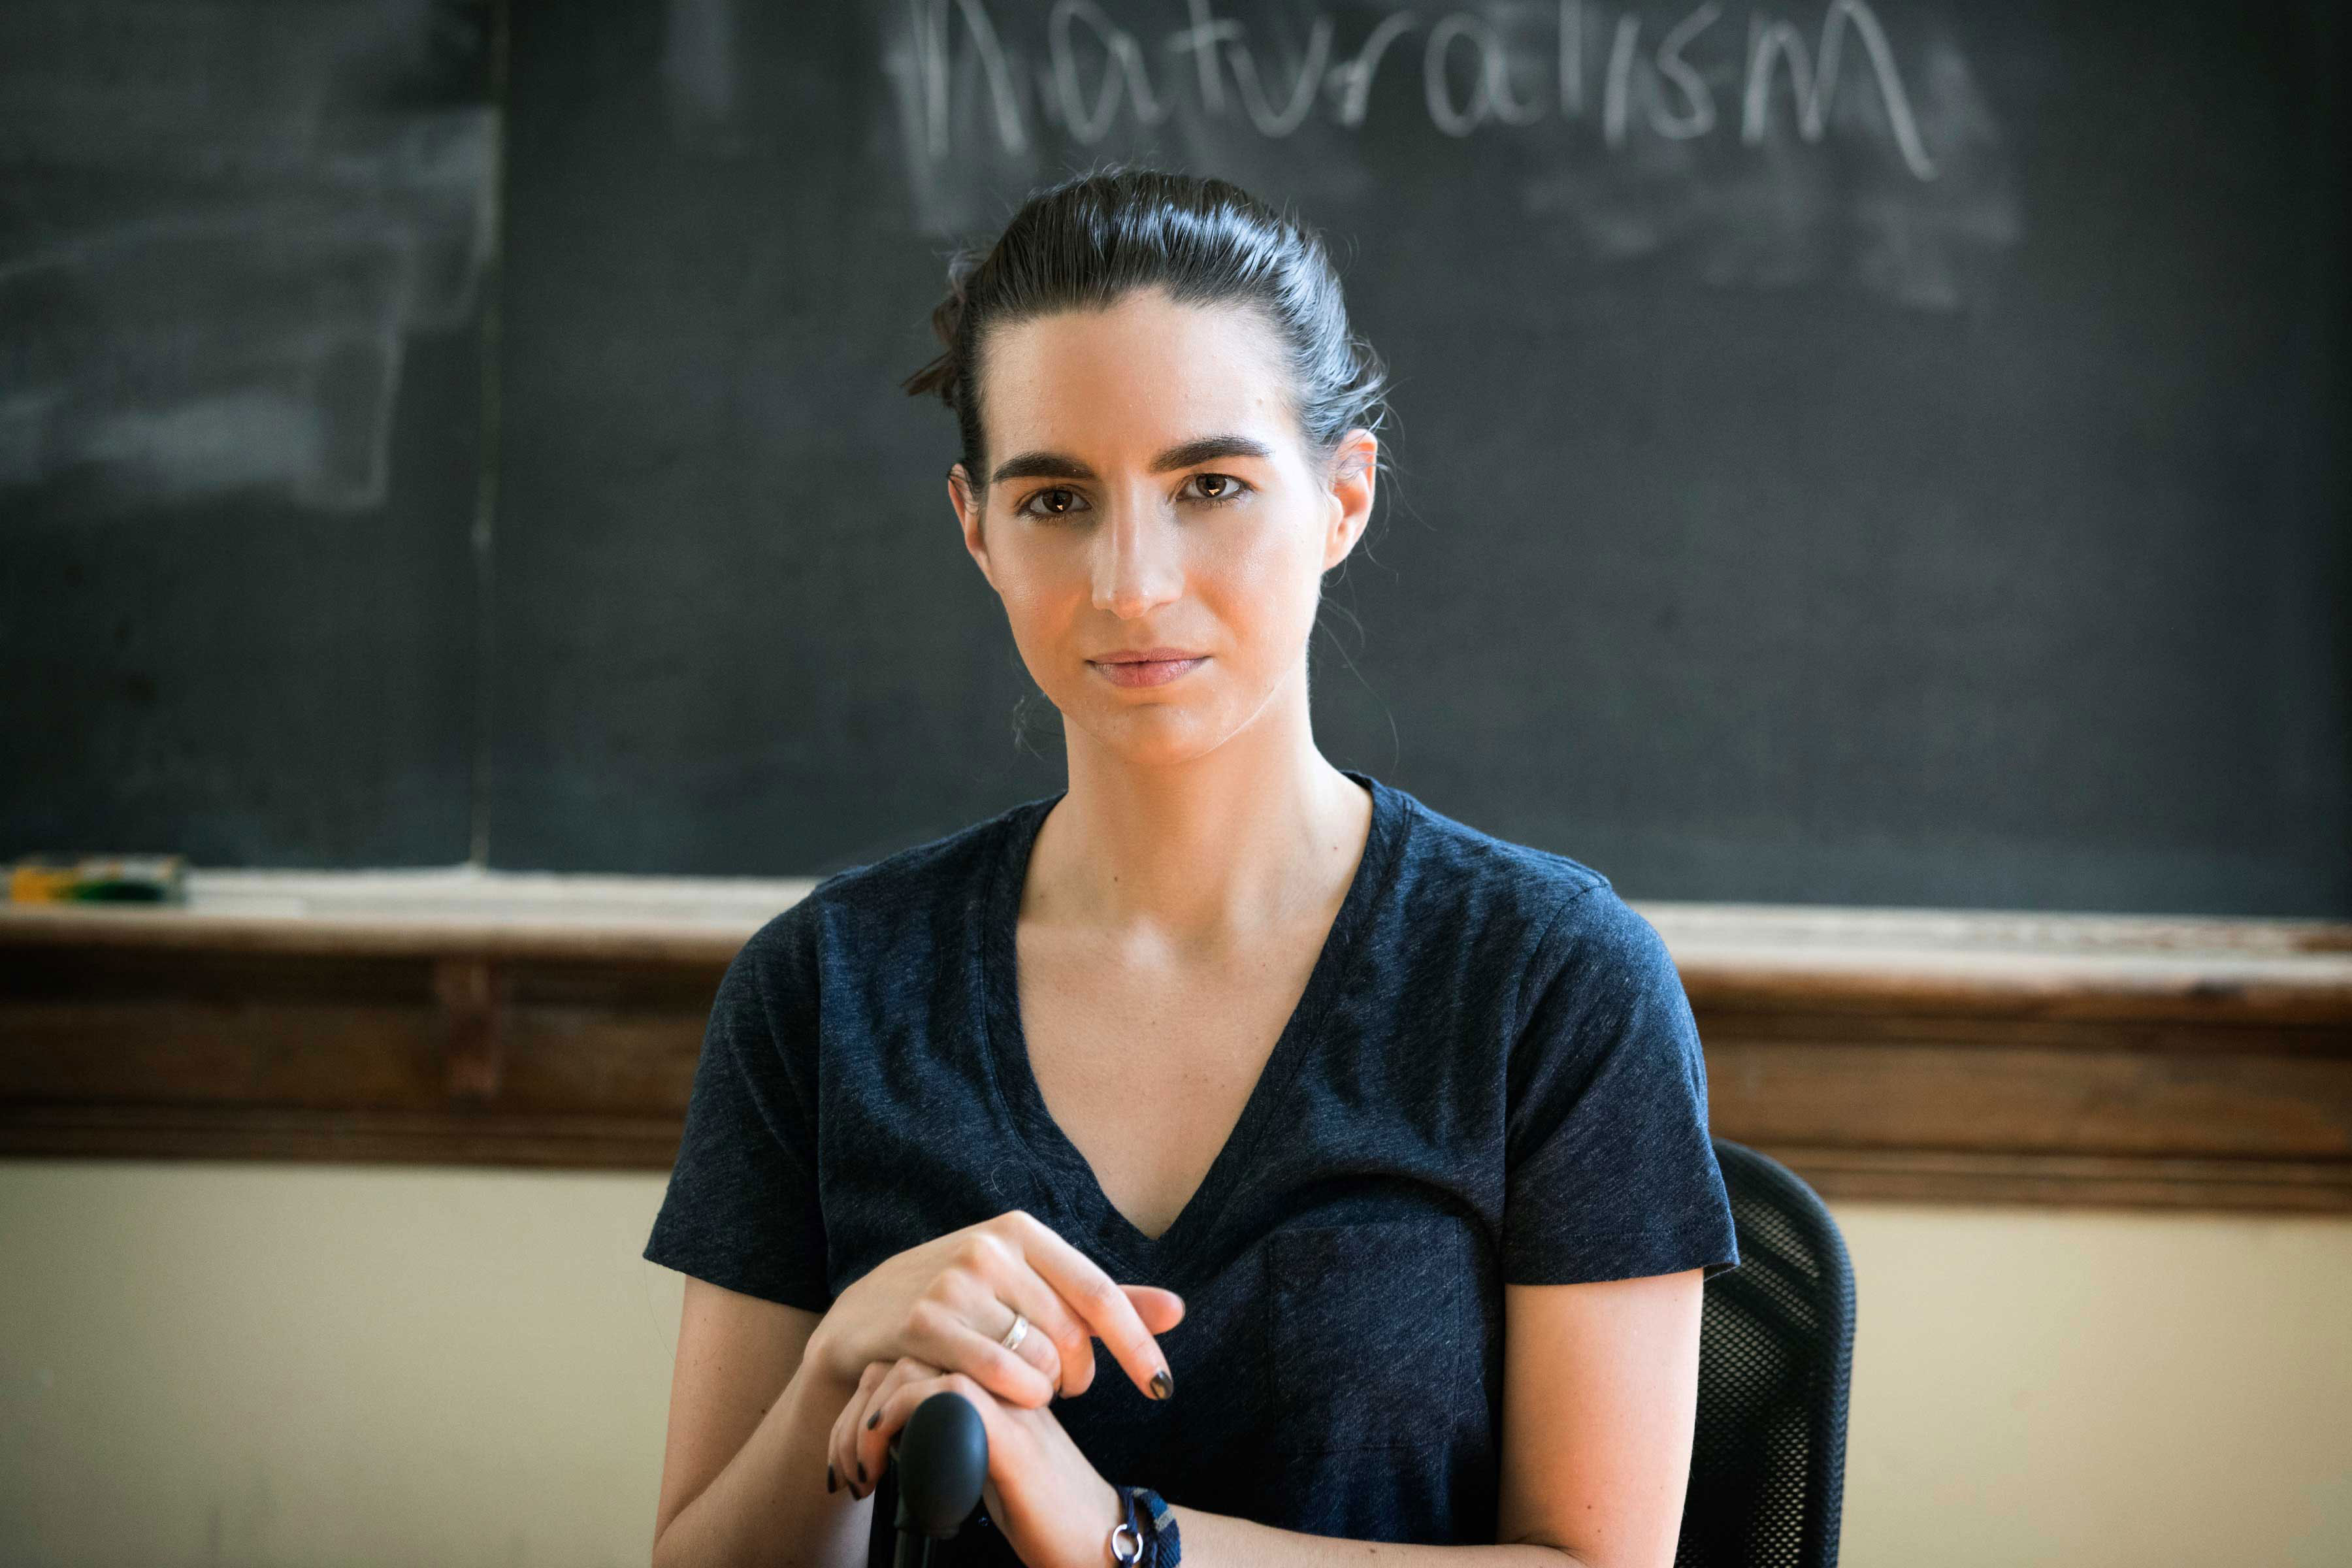 Elizabeth Barnes, an associate professor of philosophy, has spent most of her academic career questioning social norms and what it means to be “other.” (Photo by Dan Addison, University Communications)